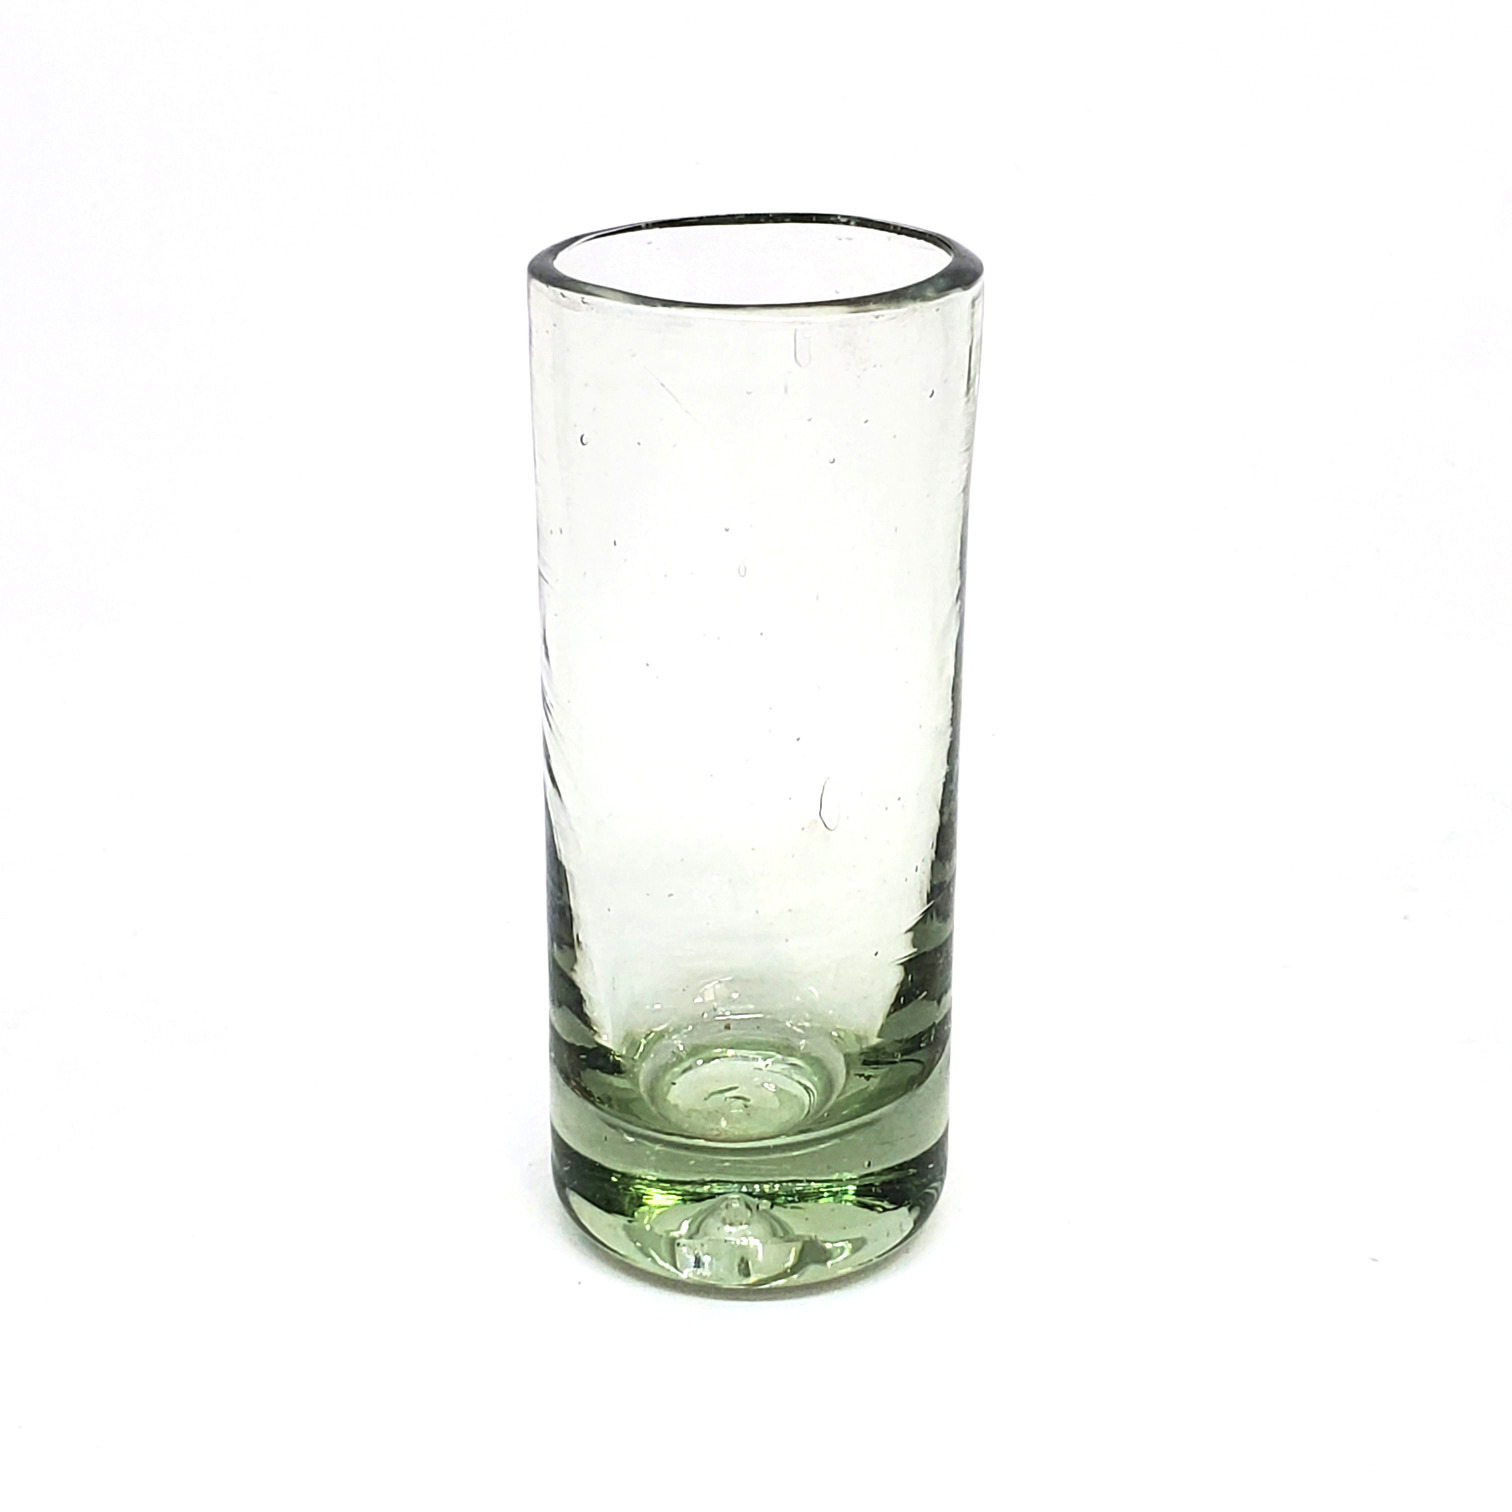 MEXICAN GLASSWARE / Clear 2 oz Tequila Shot Glasses (set of 6)